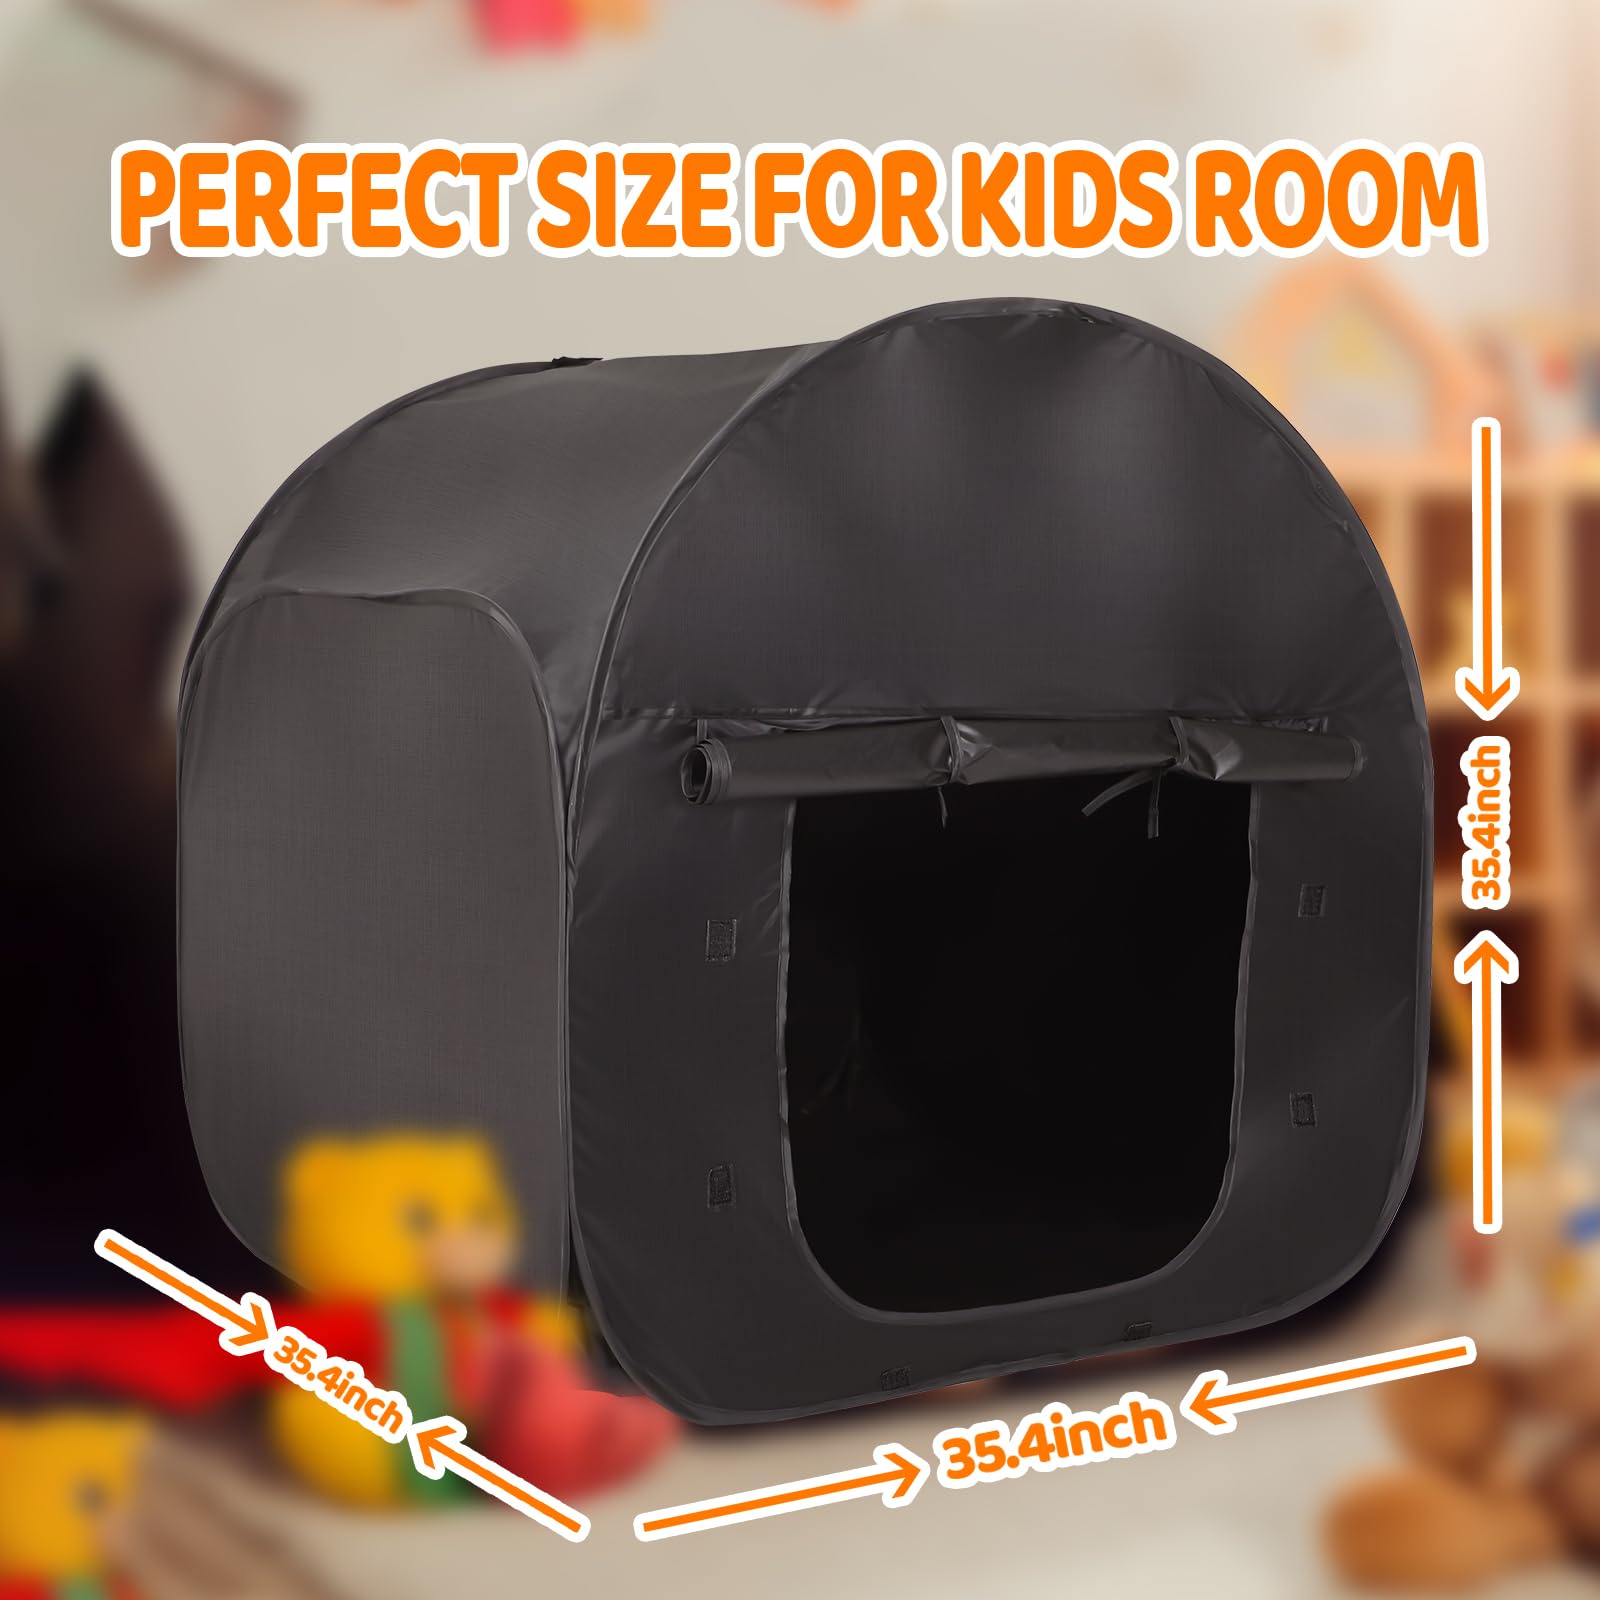 FAHKNS Sensory Tent|Quiet Corner for Kids to Play and Relax|Pop-up Blackout Tent Black|Sensory Play Tent Sensory Den|Special Needs Sensory Tent|Suitable for: SPD, Anxiety, ADHD, Autism, etc.